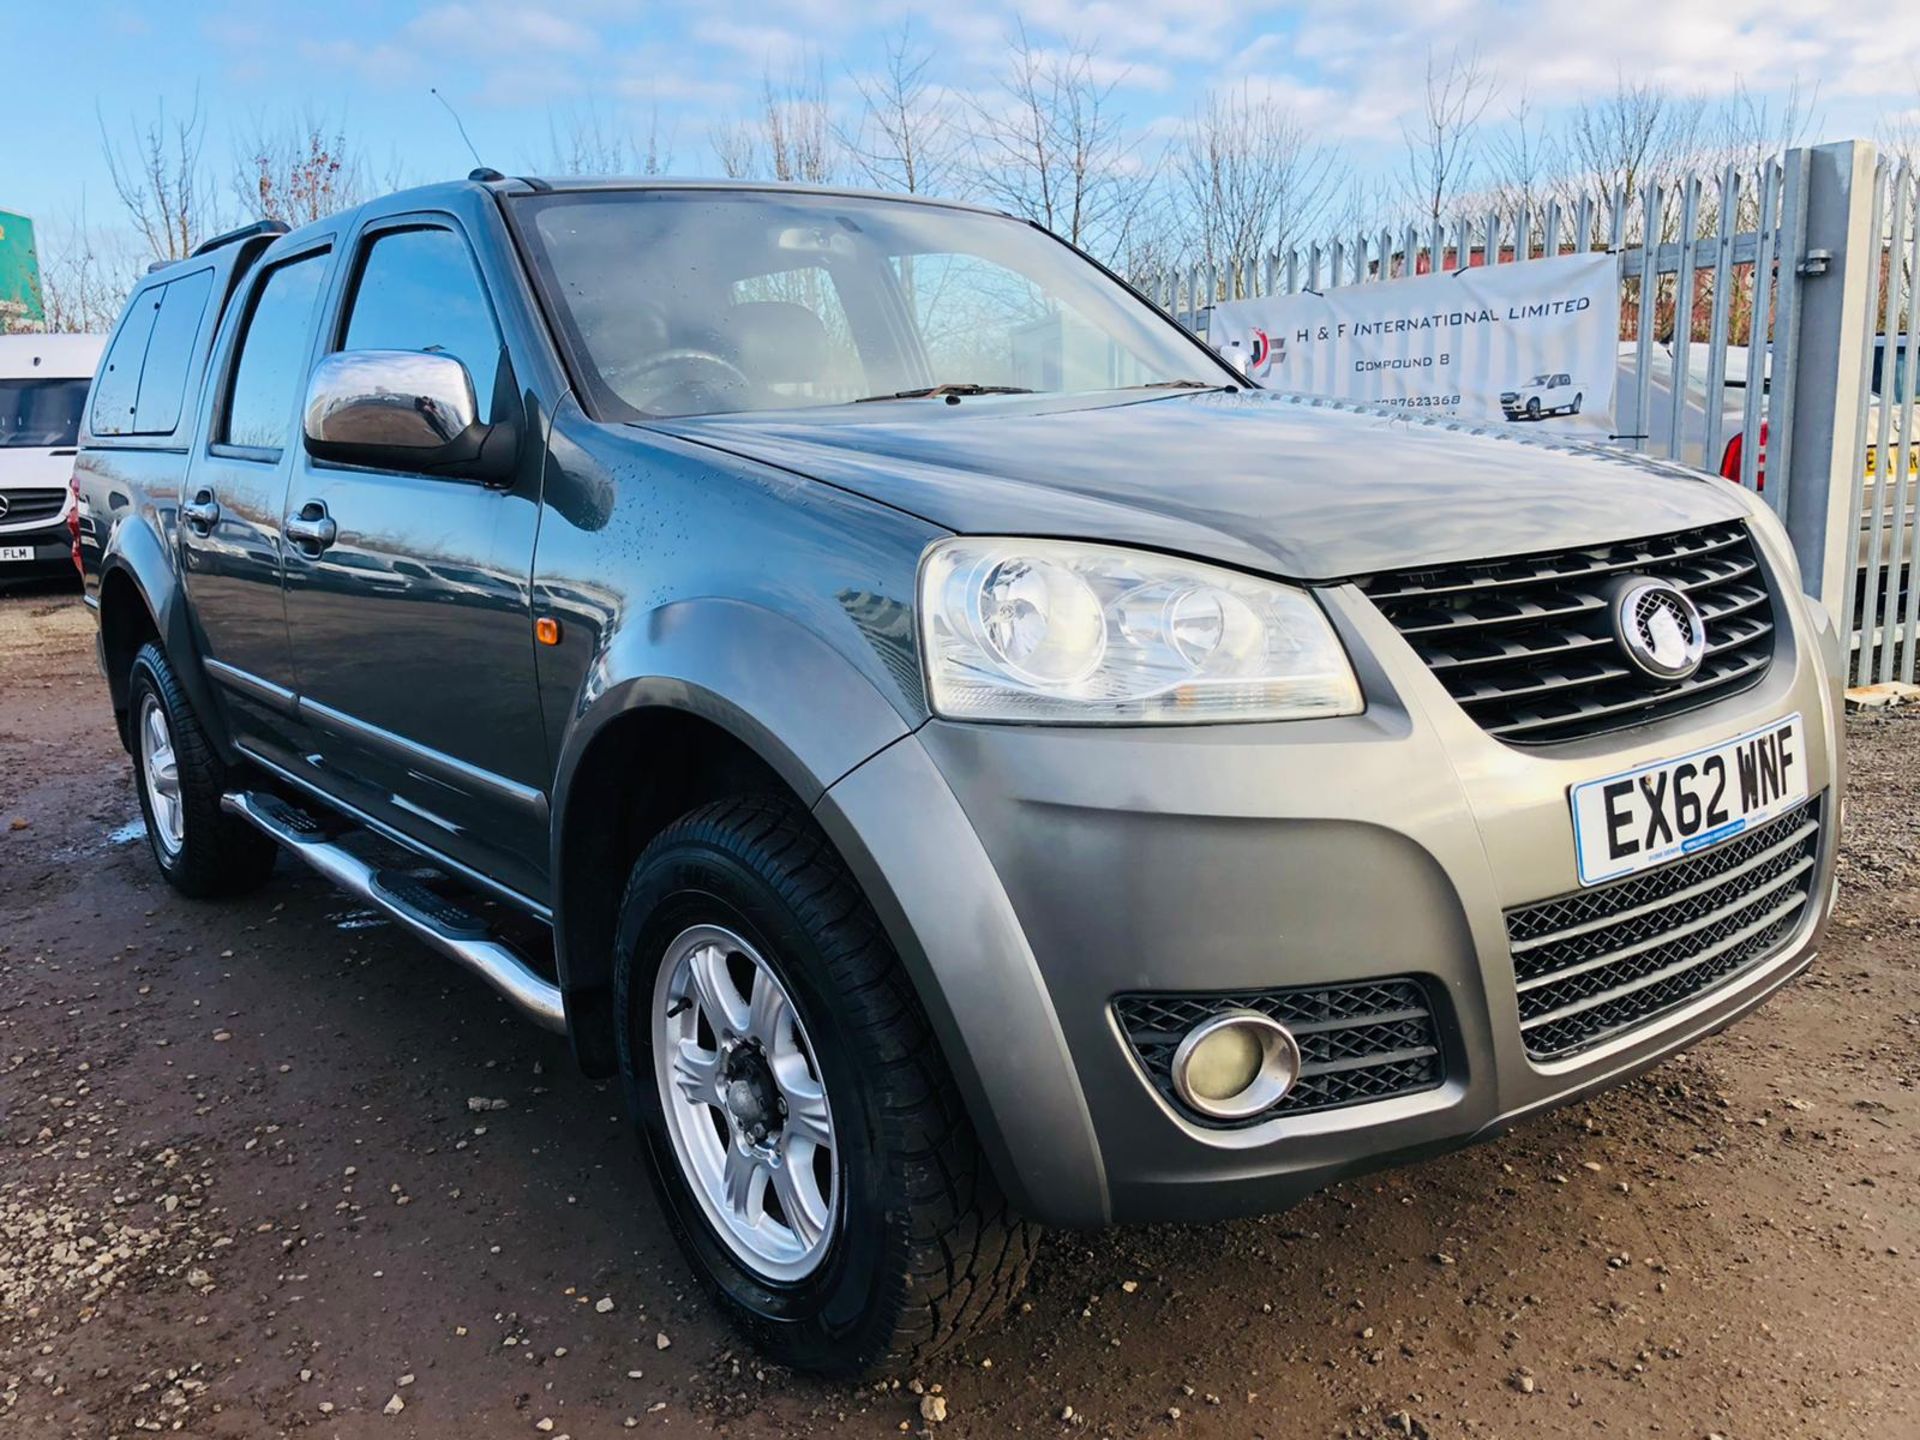 Great Wall Steed 2.0 TD 143 SE ( Special Equipment ) 4x4 Double Cab 2013 '62 Reg' - Image 2 of 24